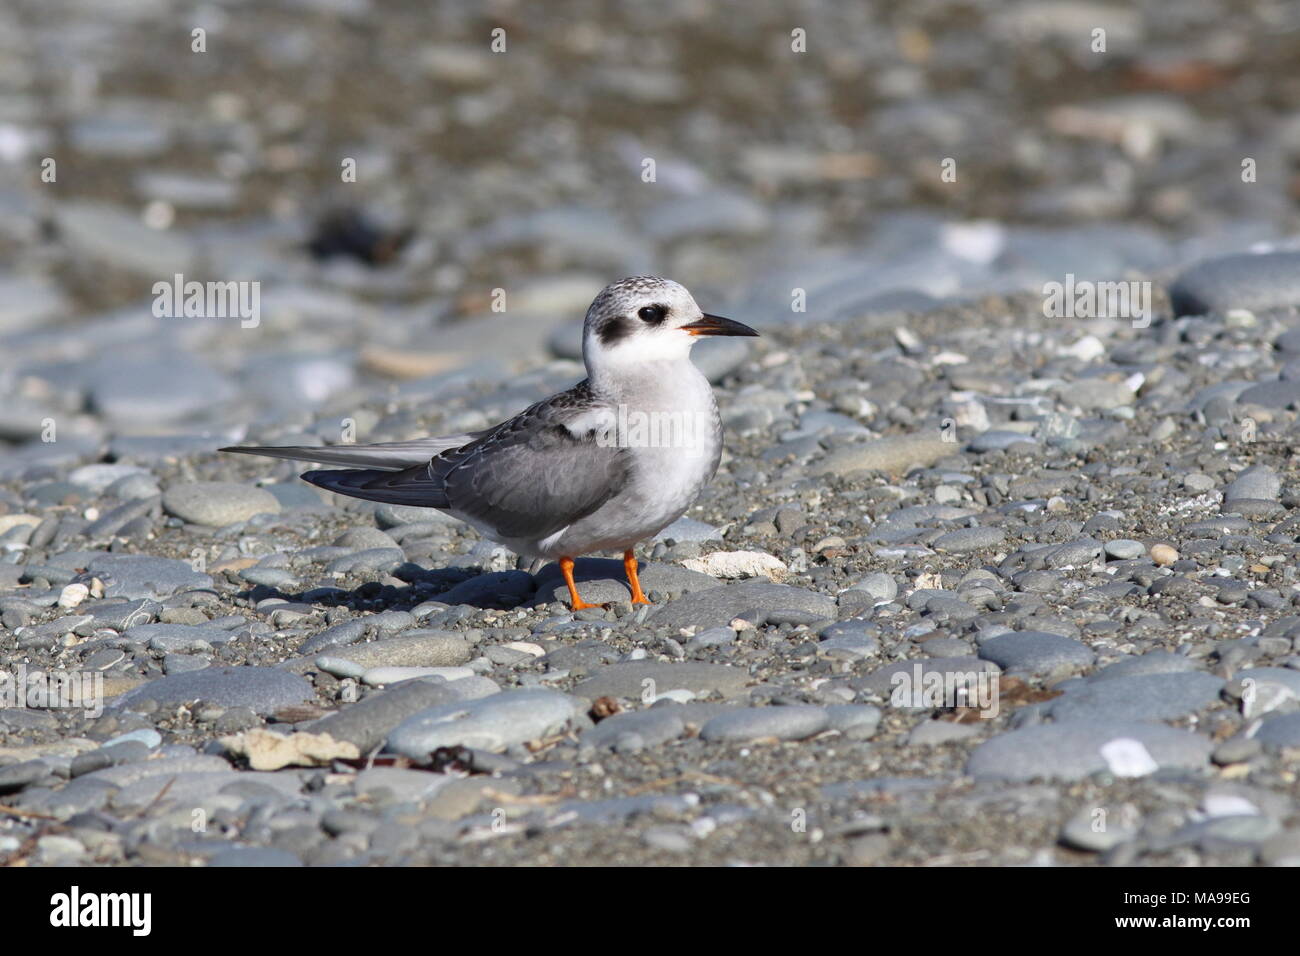 Chlidonias albostriatus, Black Fronted Tern juvenile standing on a pebble beach, this New Zealand endemic bird is endangered in 2018 Stock Photo